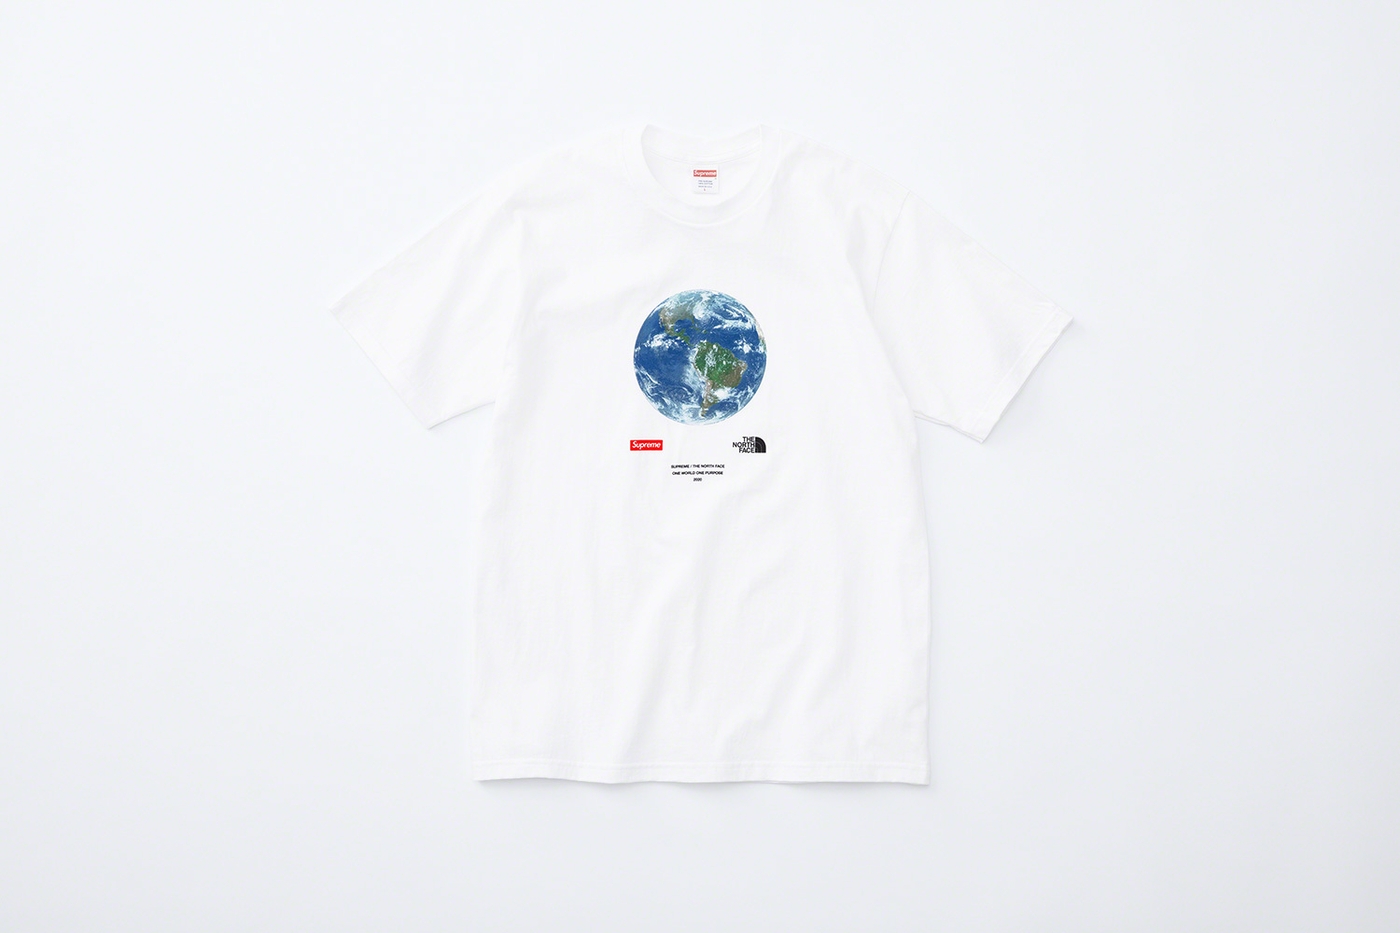 One World Tee. <span class="red">Supreme and The North Face® will donate 100% of profits from One World Tee sales to <a target="_blank" href="https://www.globalgiving.org/projects/coronavirus-relief-fund/"><u>GlobalGiving’s Coronavirus Relief Fund</u></a>, providing resources to communities on the front lines and protecting the most vulnerable. </span> (32/39)